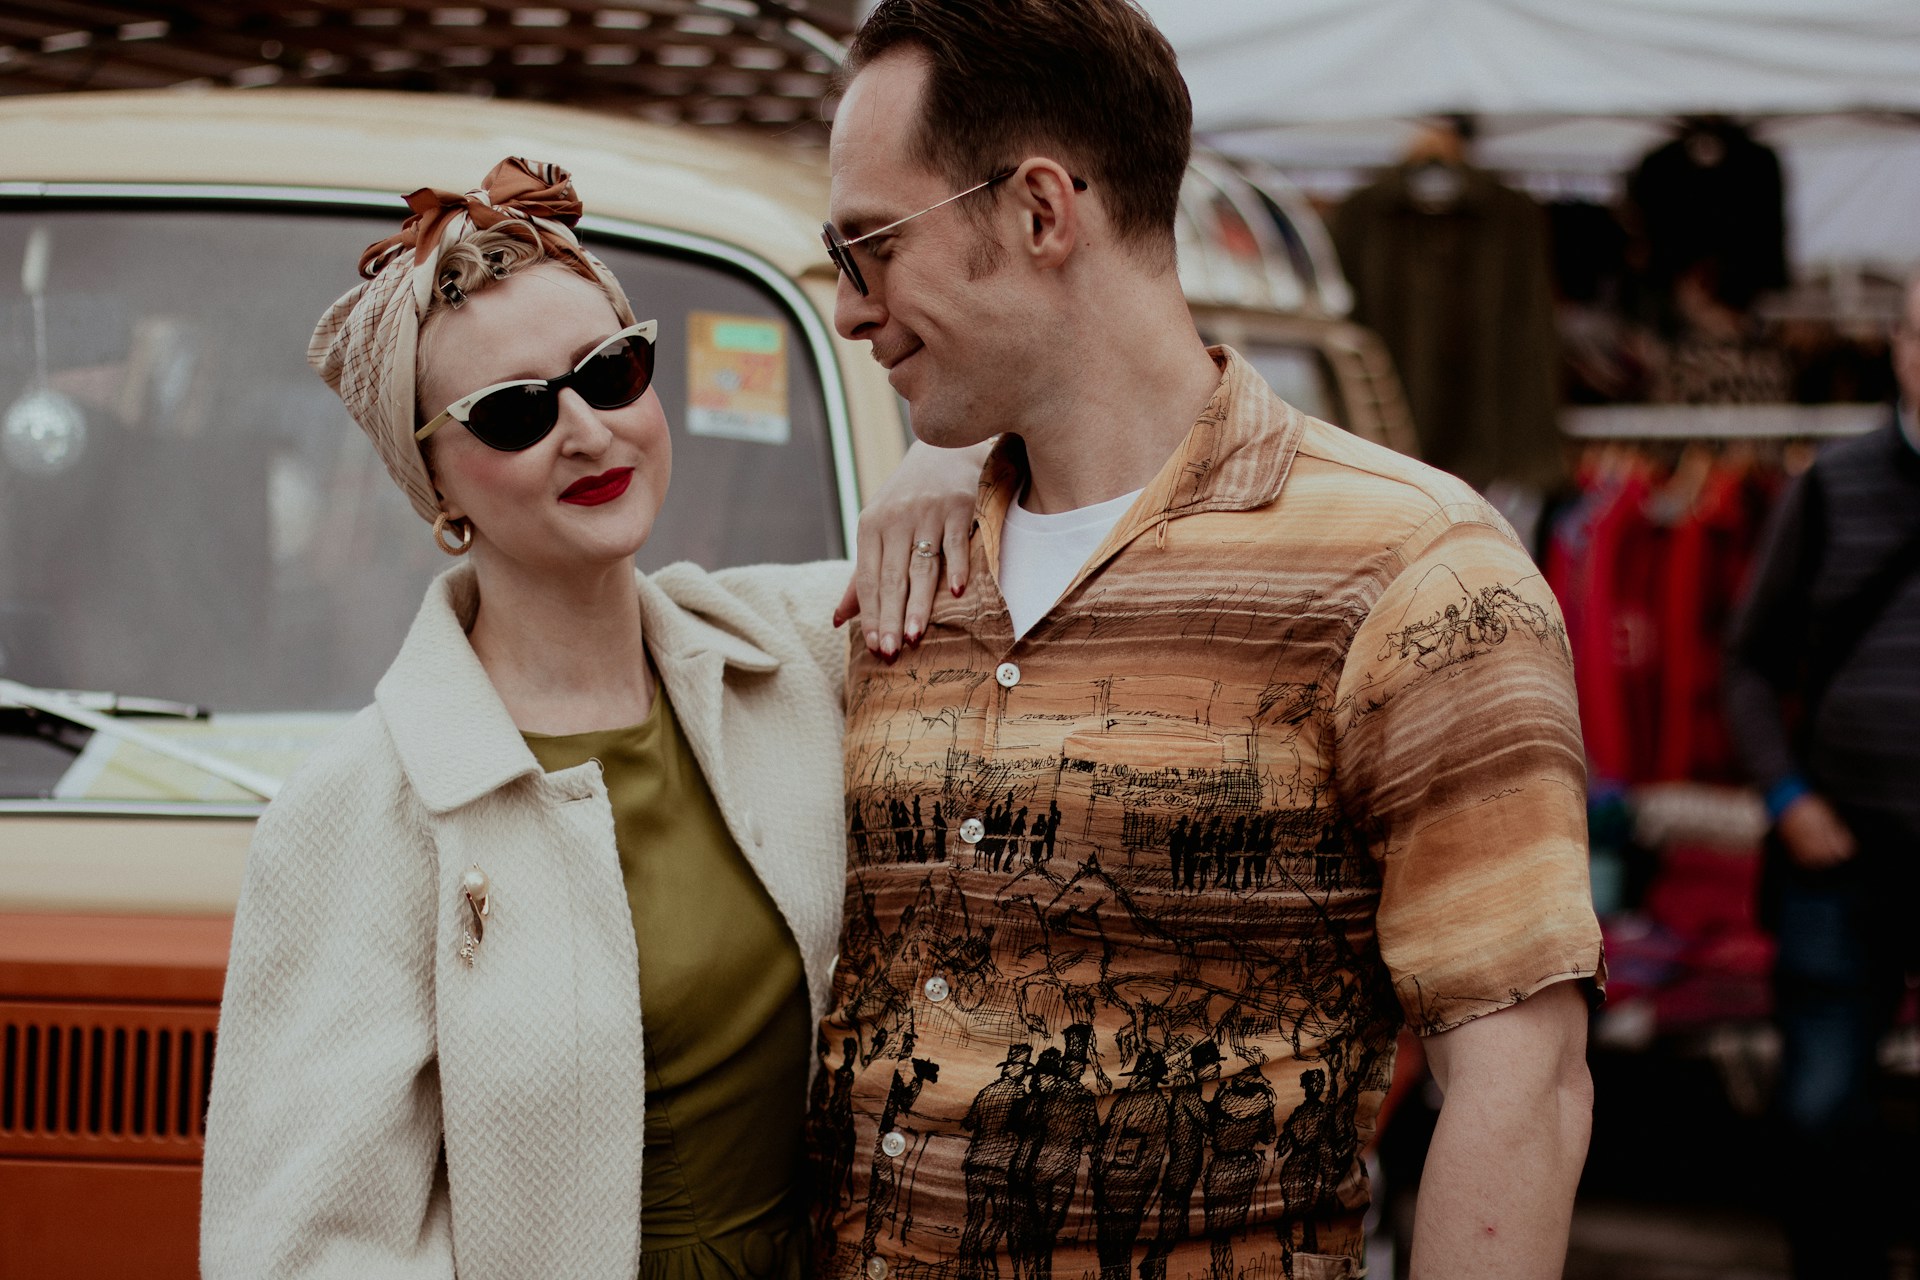 A man and a woman wearing vintage clothing